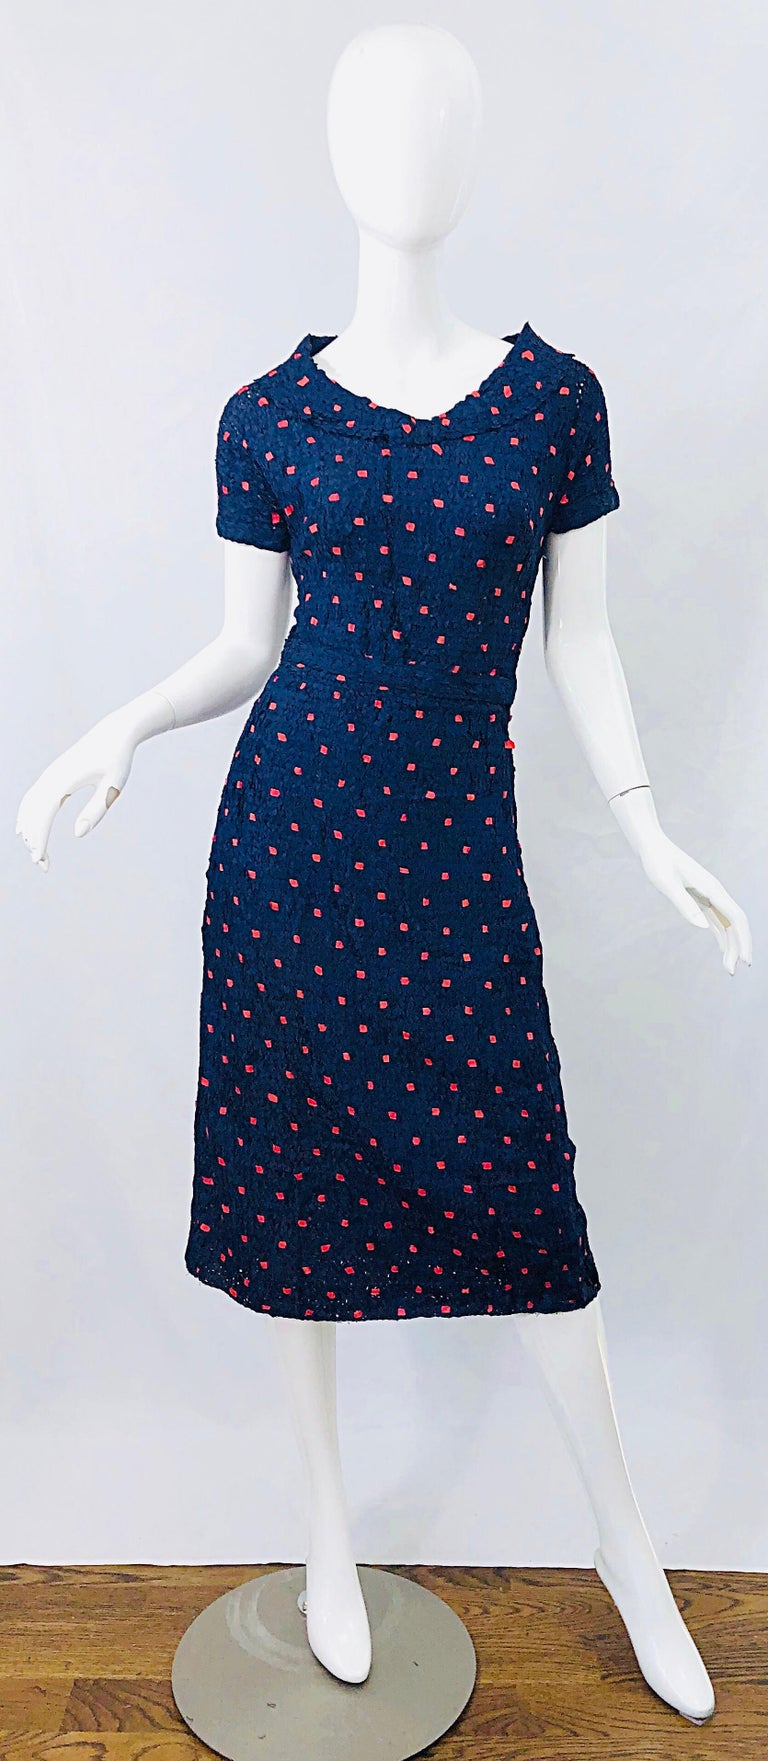 Rare ANN FLEISCHER for I. MAGNIN early 1950s navy blue and red hand knit ribbon silk belted dress ! Couture quality with the entire dress literally hand woven with silk ribbons. Chic collar with a tailored bodice. Hidden metal zipper up the side